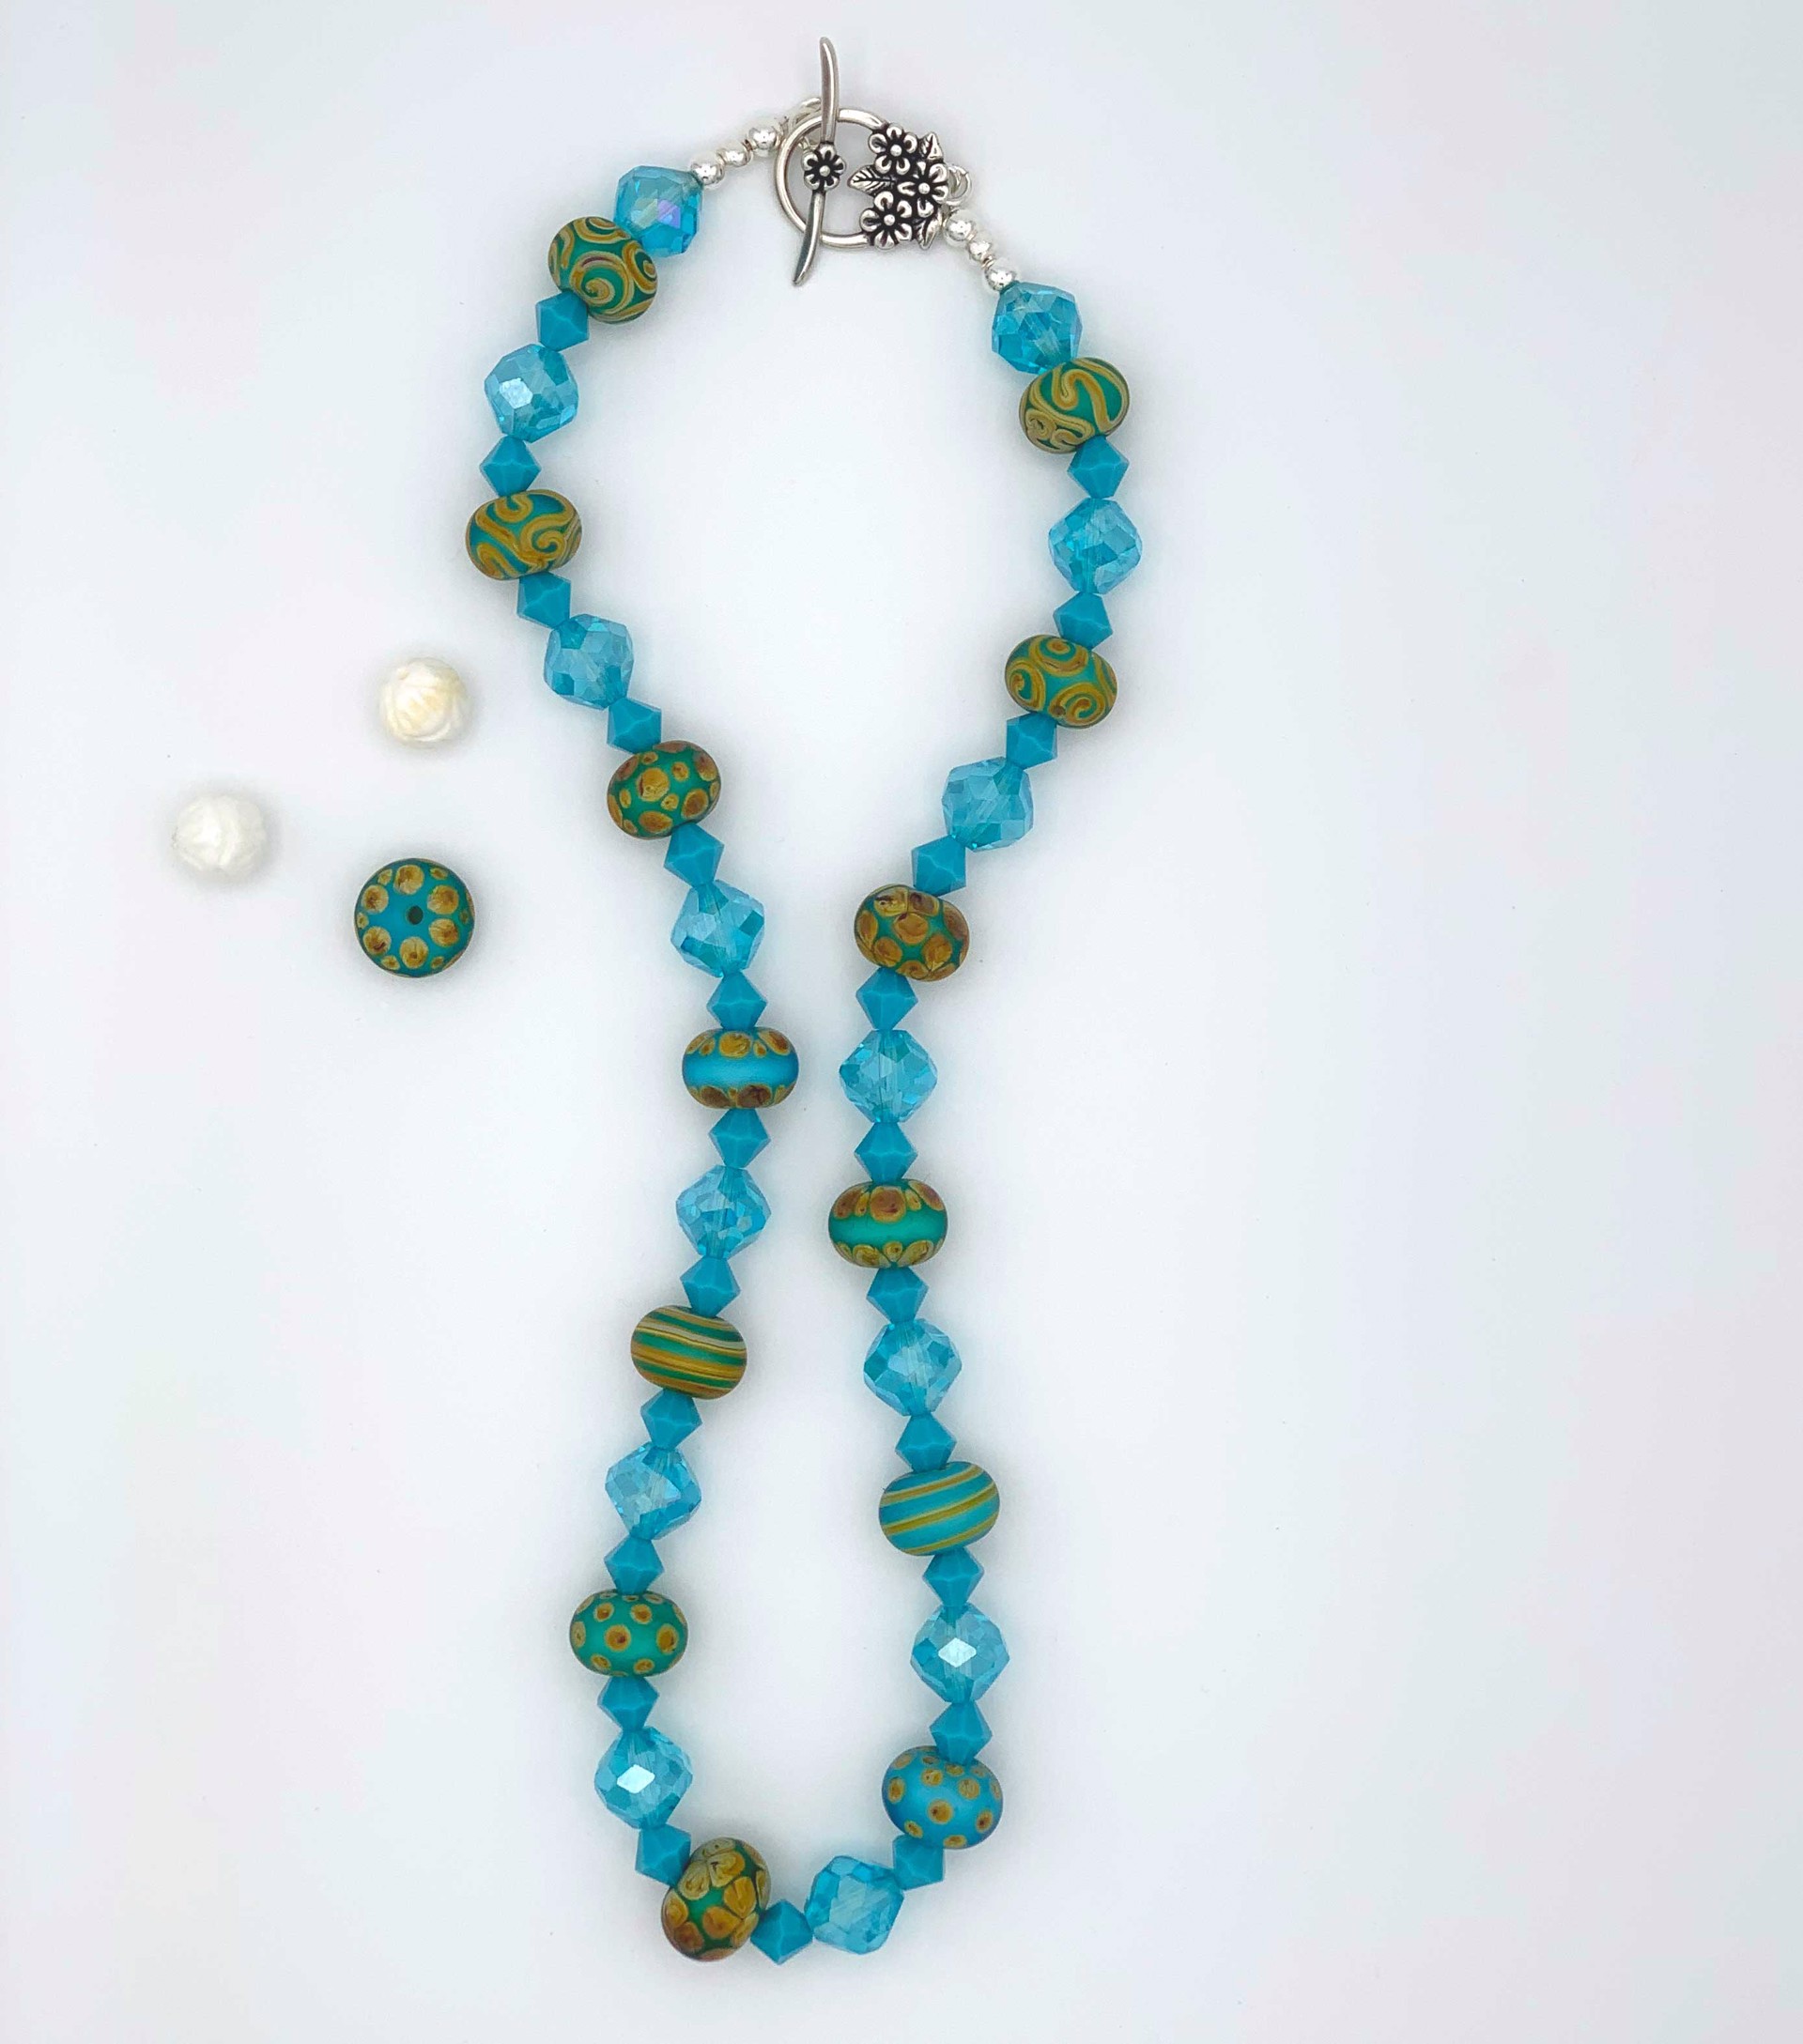 Beautiful blue Swarovski crystals and hand-torched glass beads, add a sea and sky appearance to this delightful necklace.